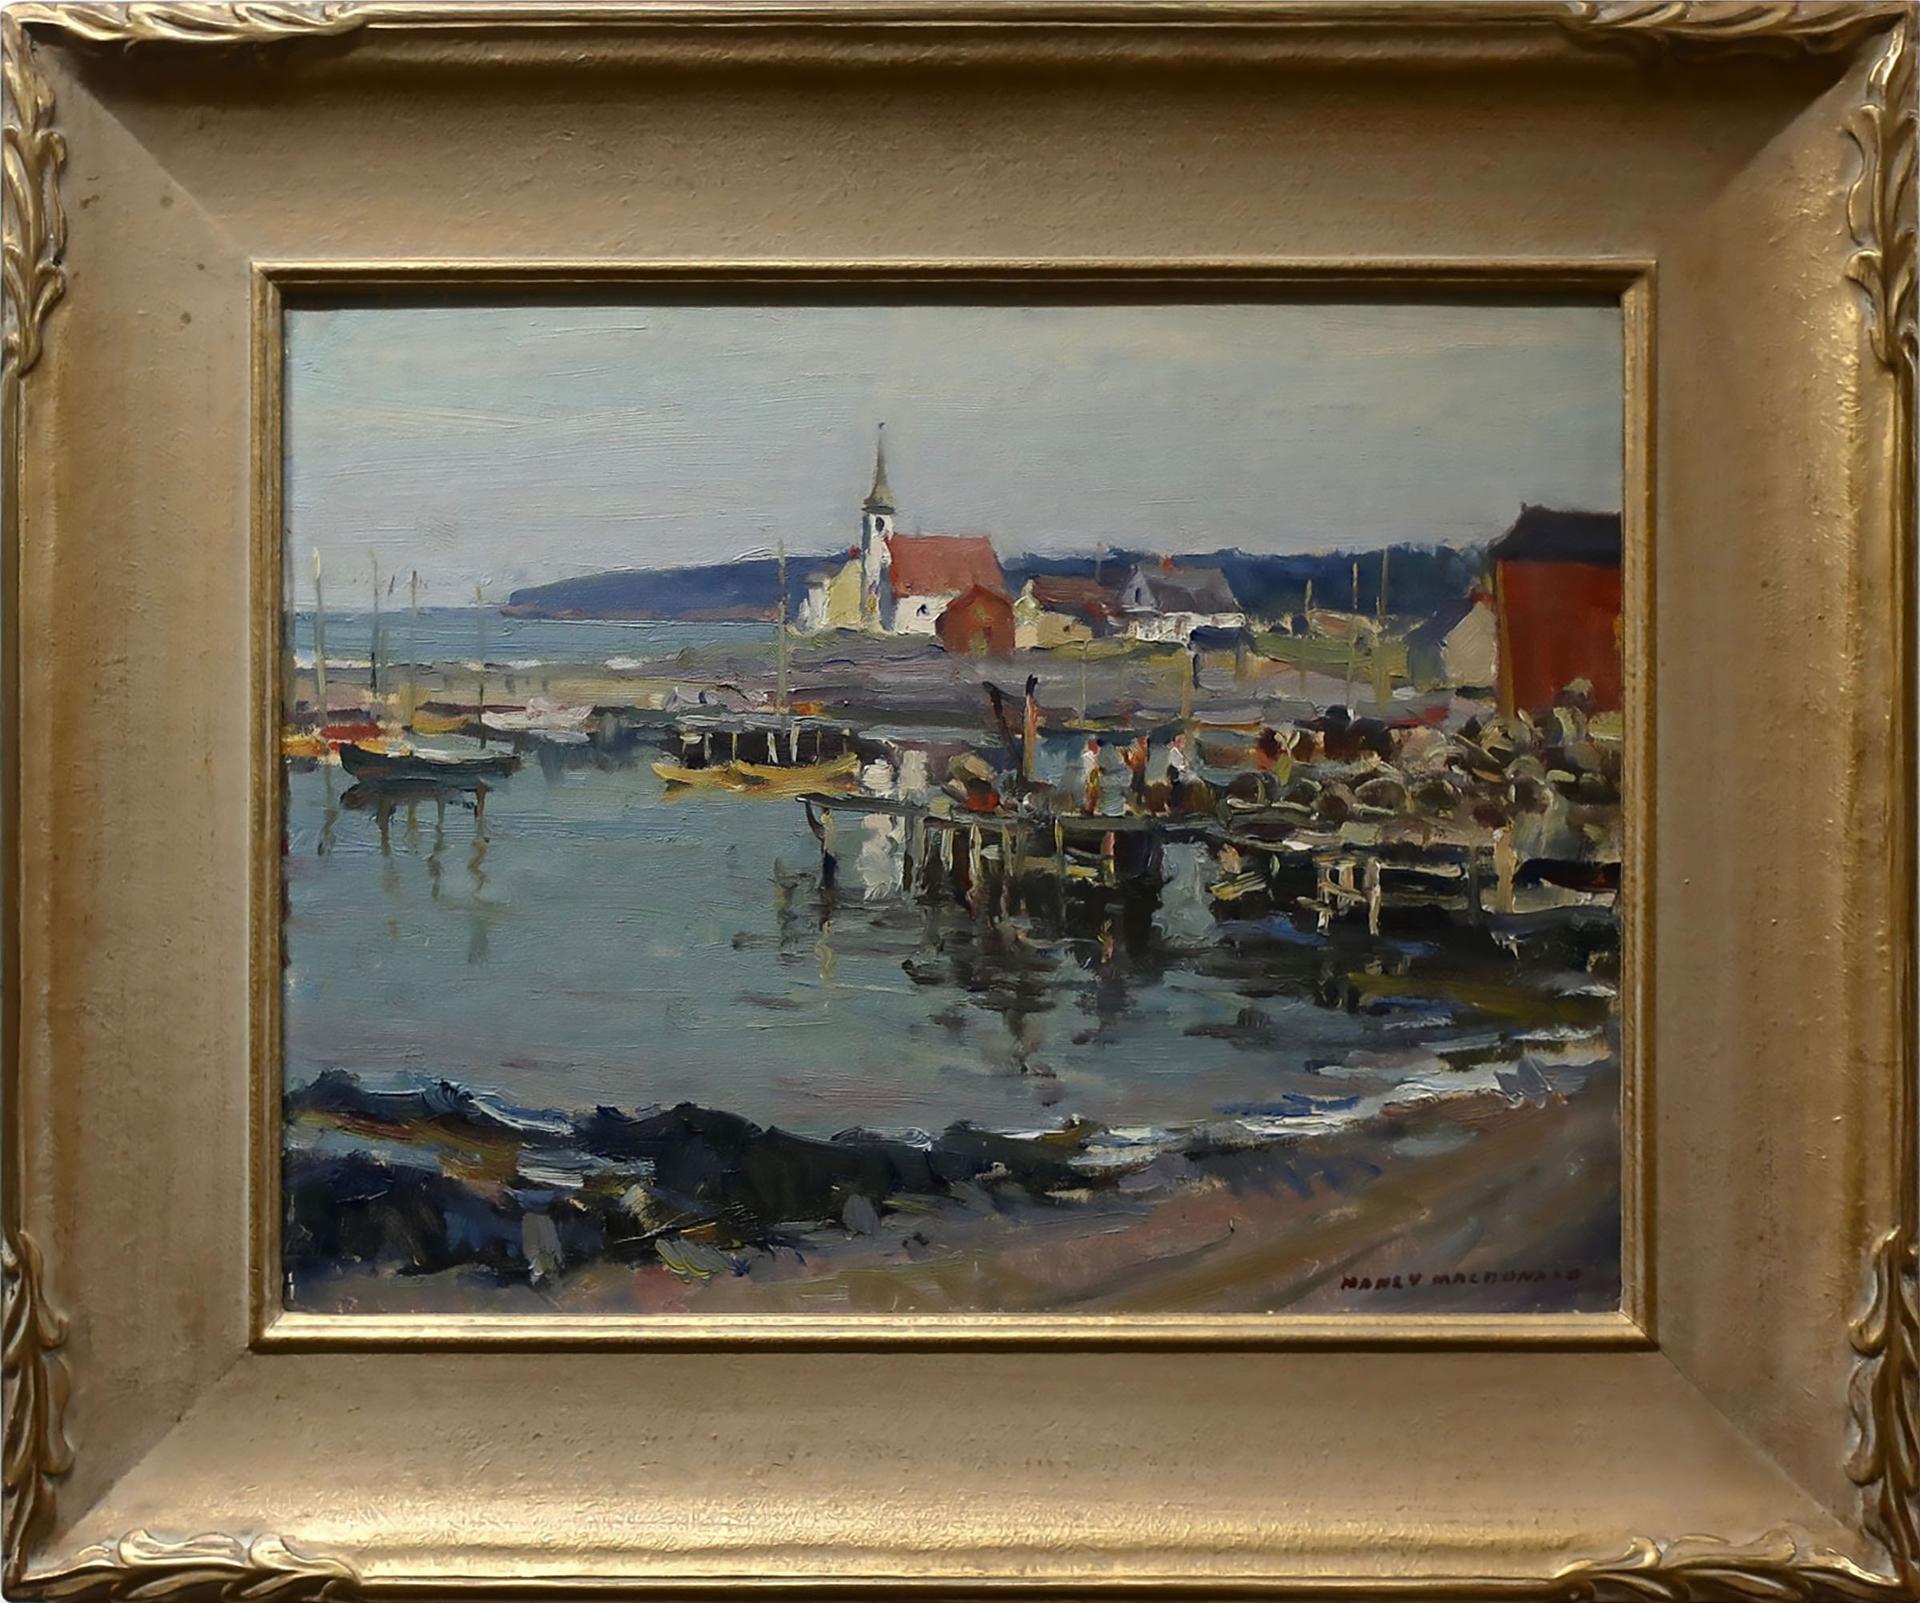 Manly Edward MacDonald (1889-1971) - Untitled (A Busy Inlet)